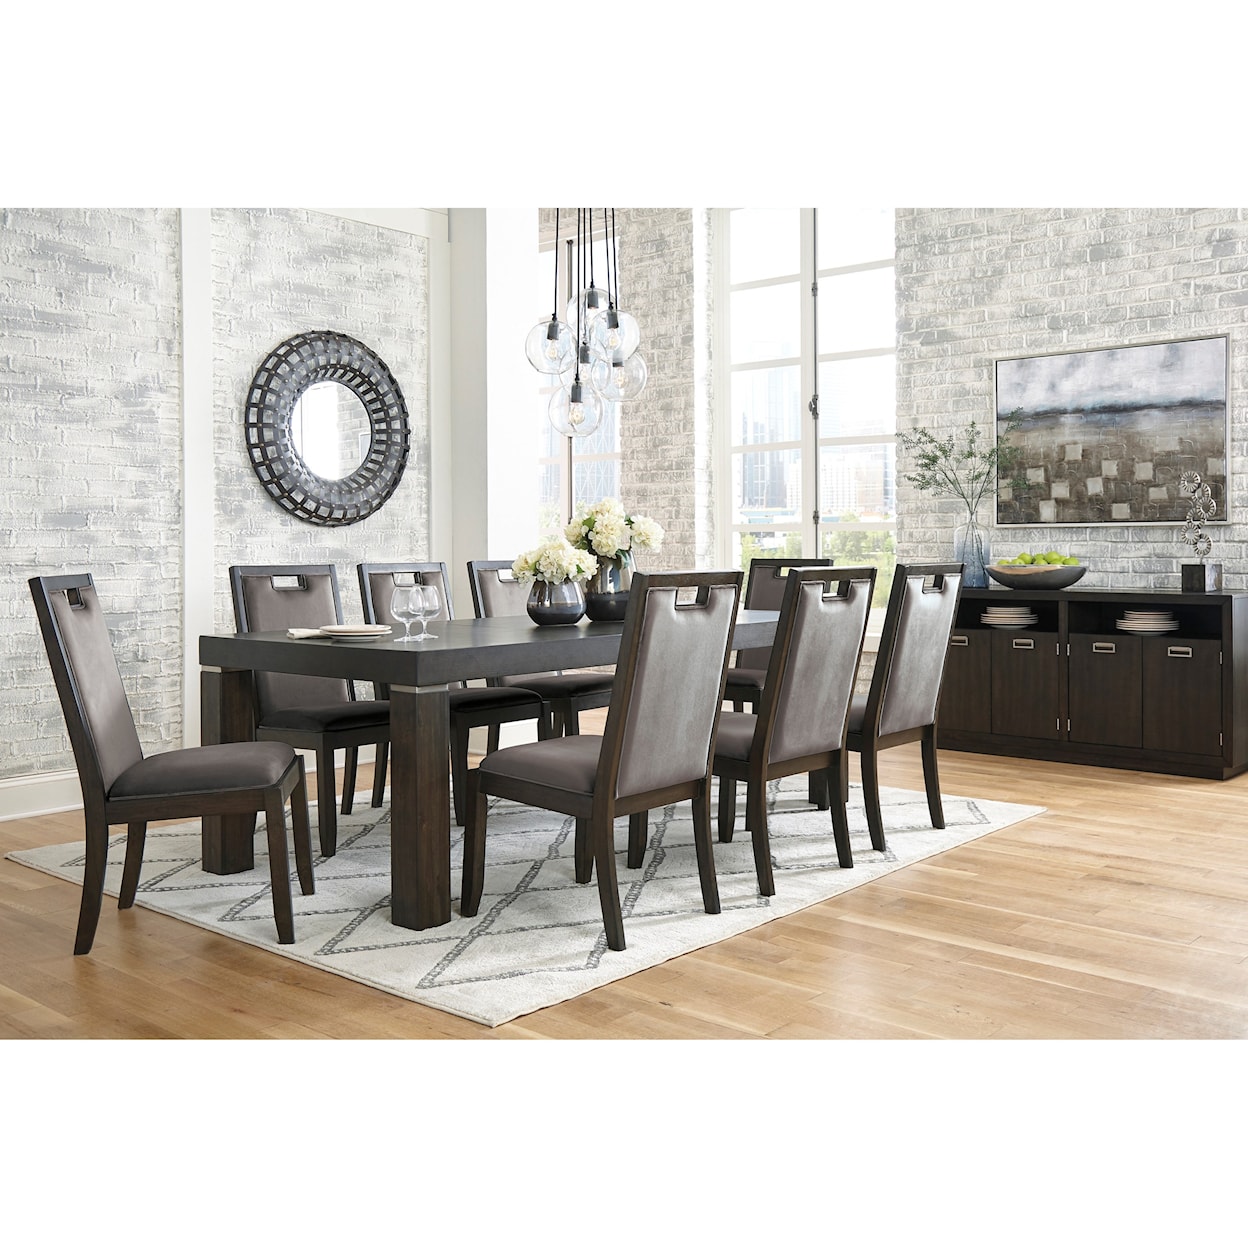 Signature Design Hyndell Dining Room Group